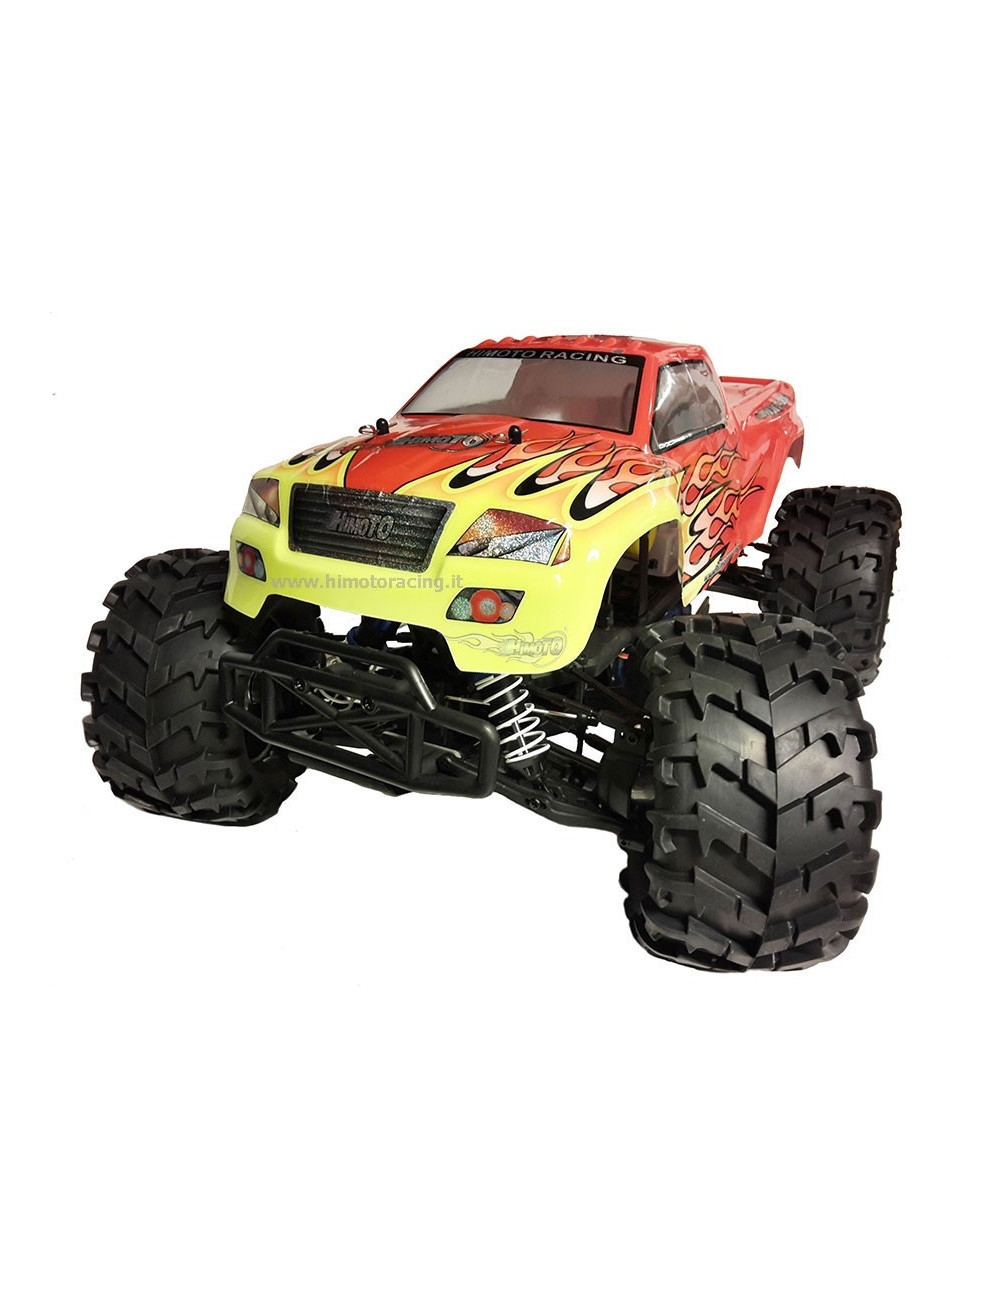 MONSTER TRUCK MEGAP MXT-2S Motore a scoppio SH21 cambio a 2 marce RTR 4wd 2.4ghz